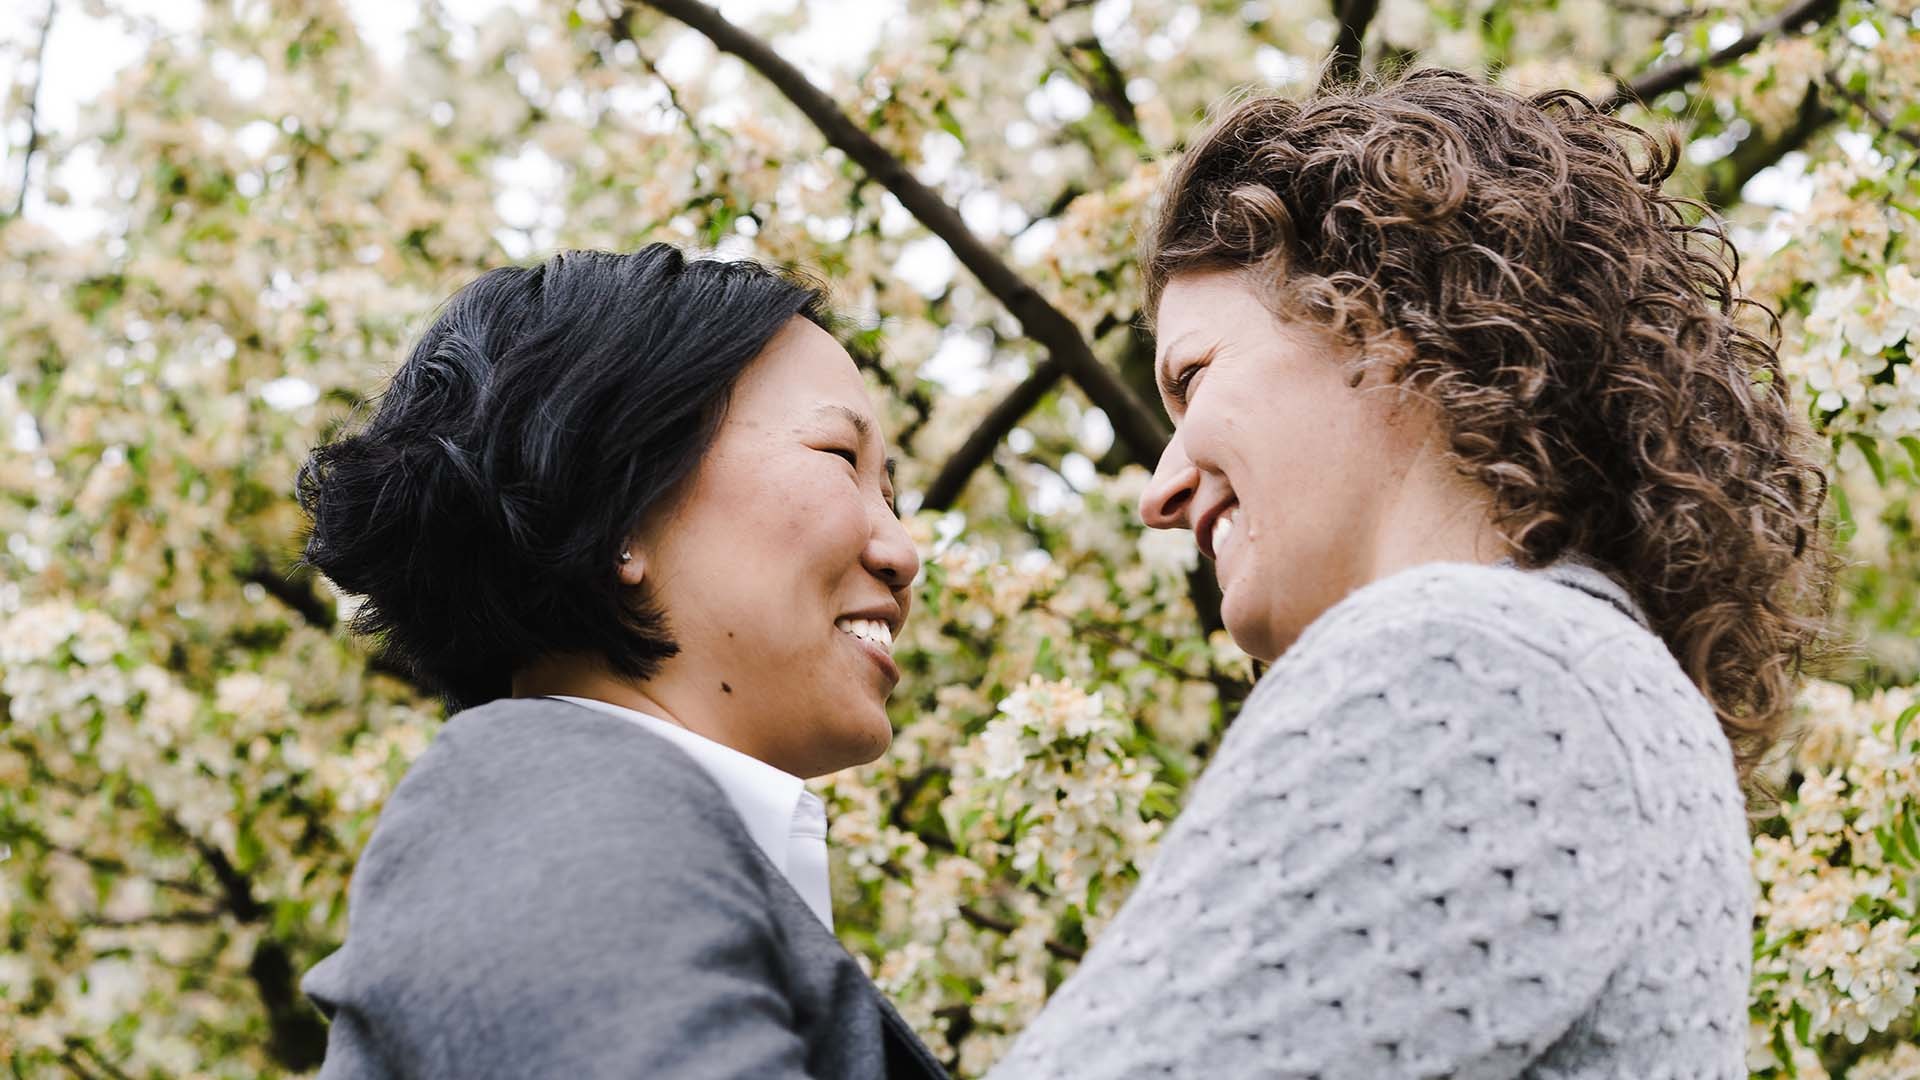 Interfacial LGBTQ+ couple looking into each other's eyes in front of a blooming tree